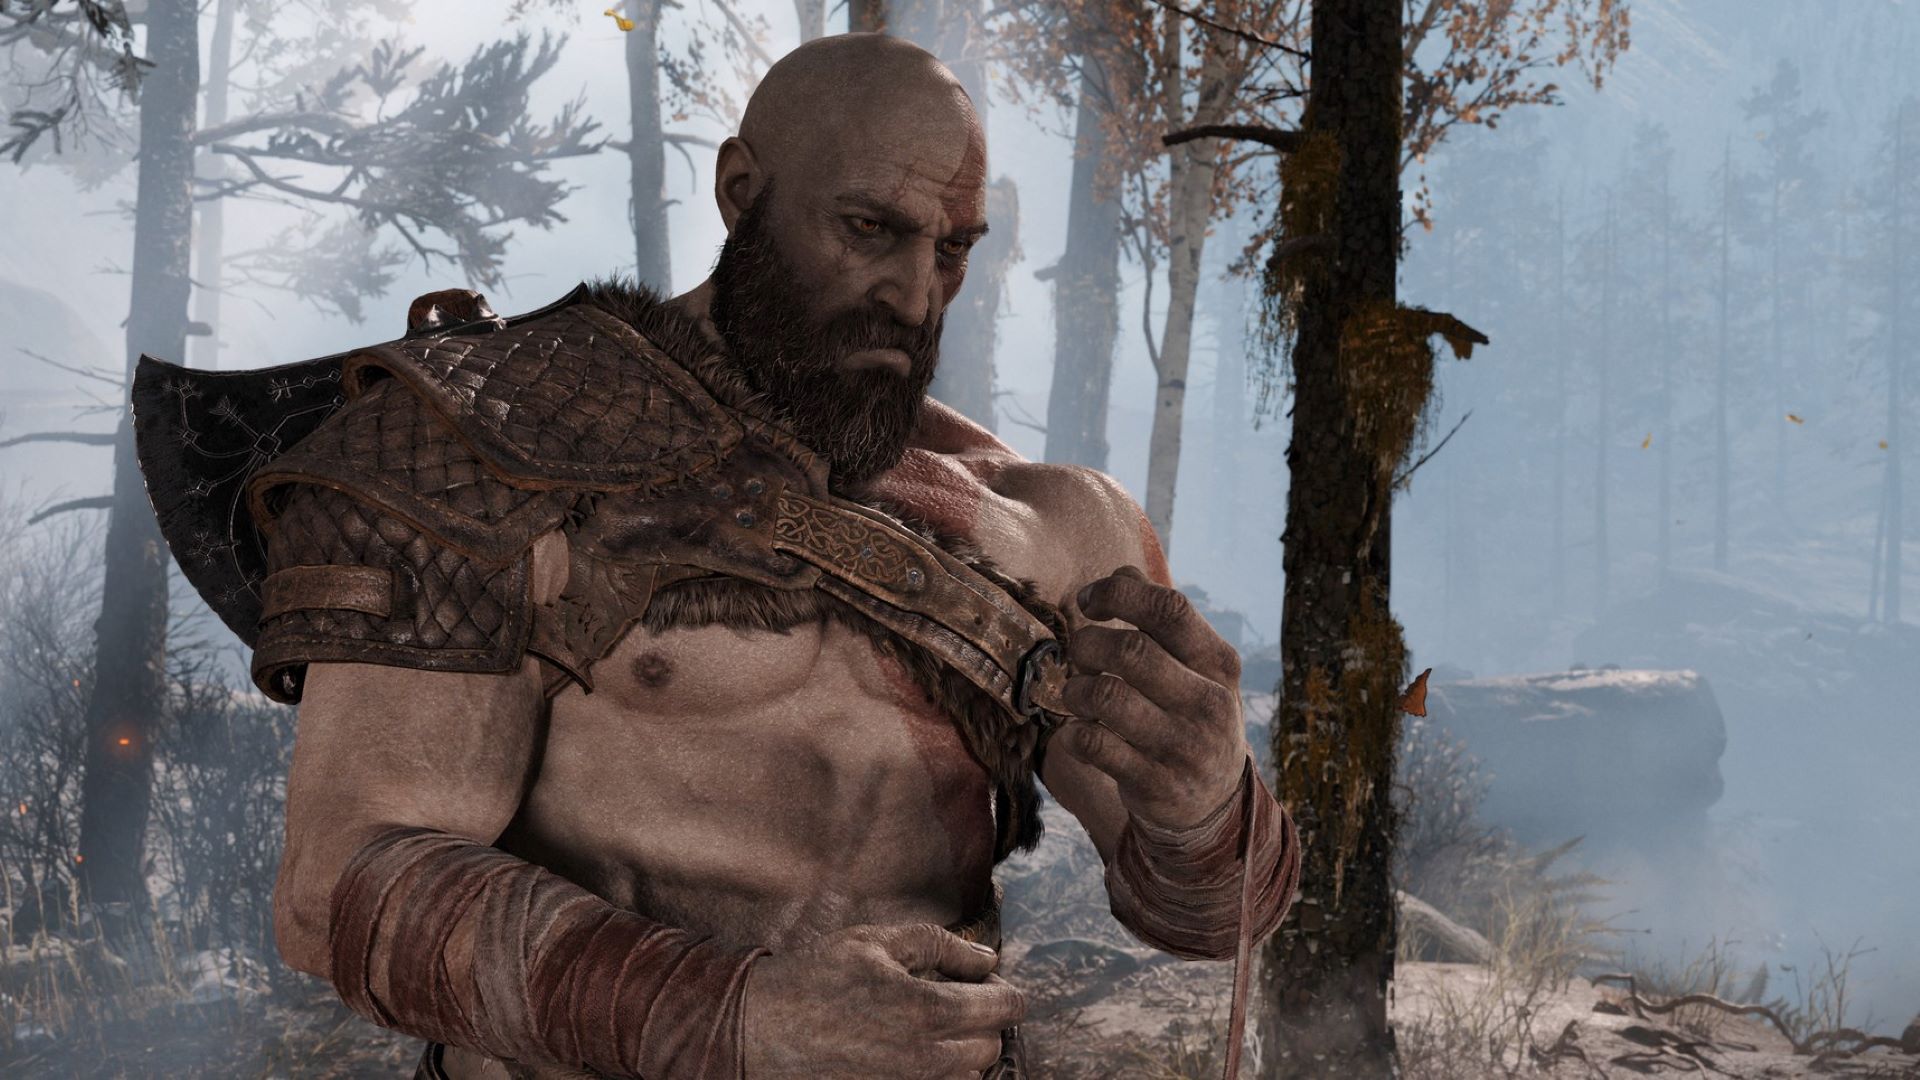 God of War PC: all the information and specs to see if it's right